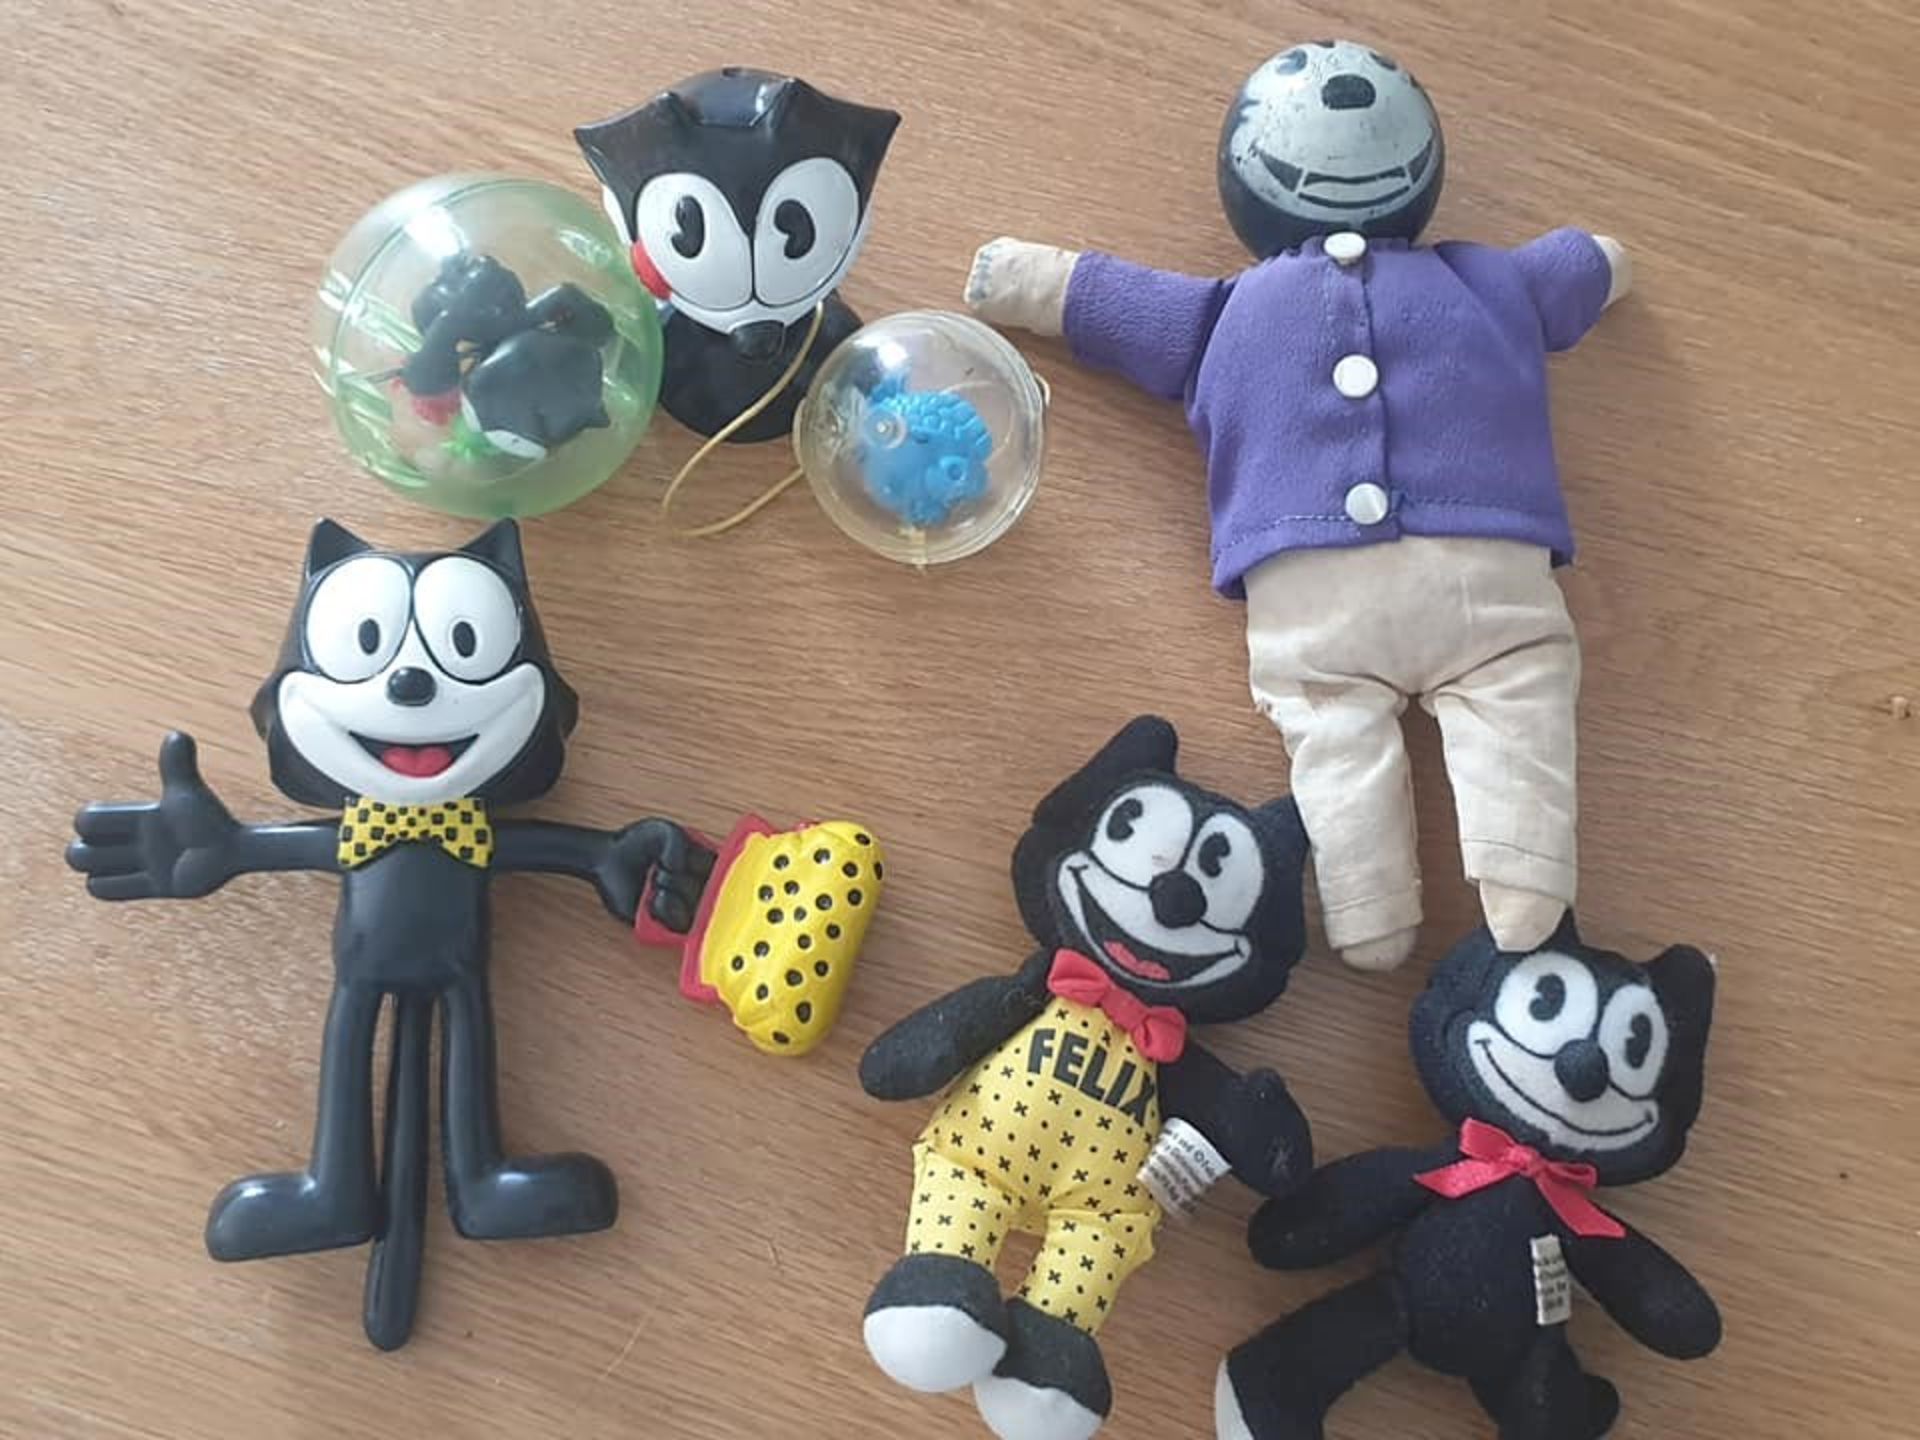 Collection Of Felix The Cat Toys Figures 6 pieces total All From The Late 1980S As Original Toys - Image 2 of 2